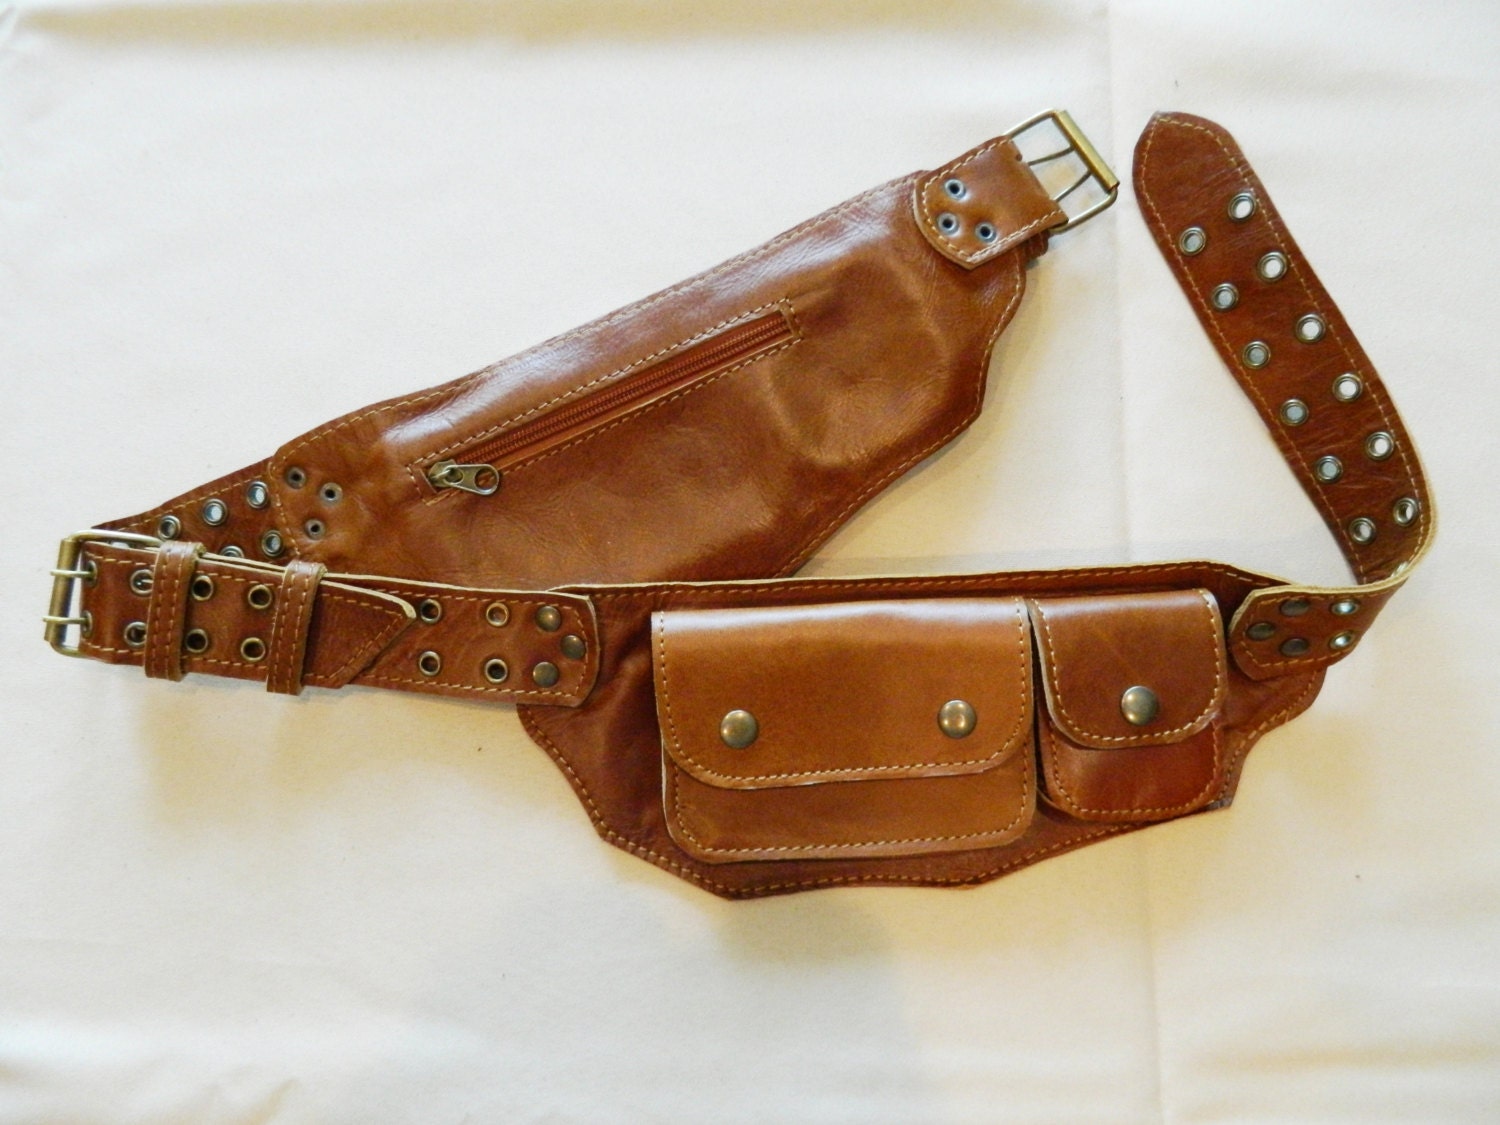 Leather Festival Pouch Utility Belt Montana by CrushObsession